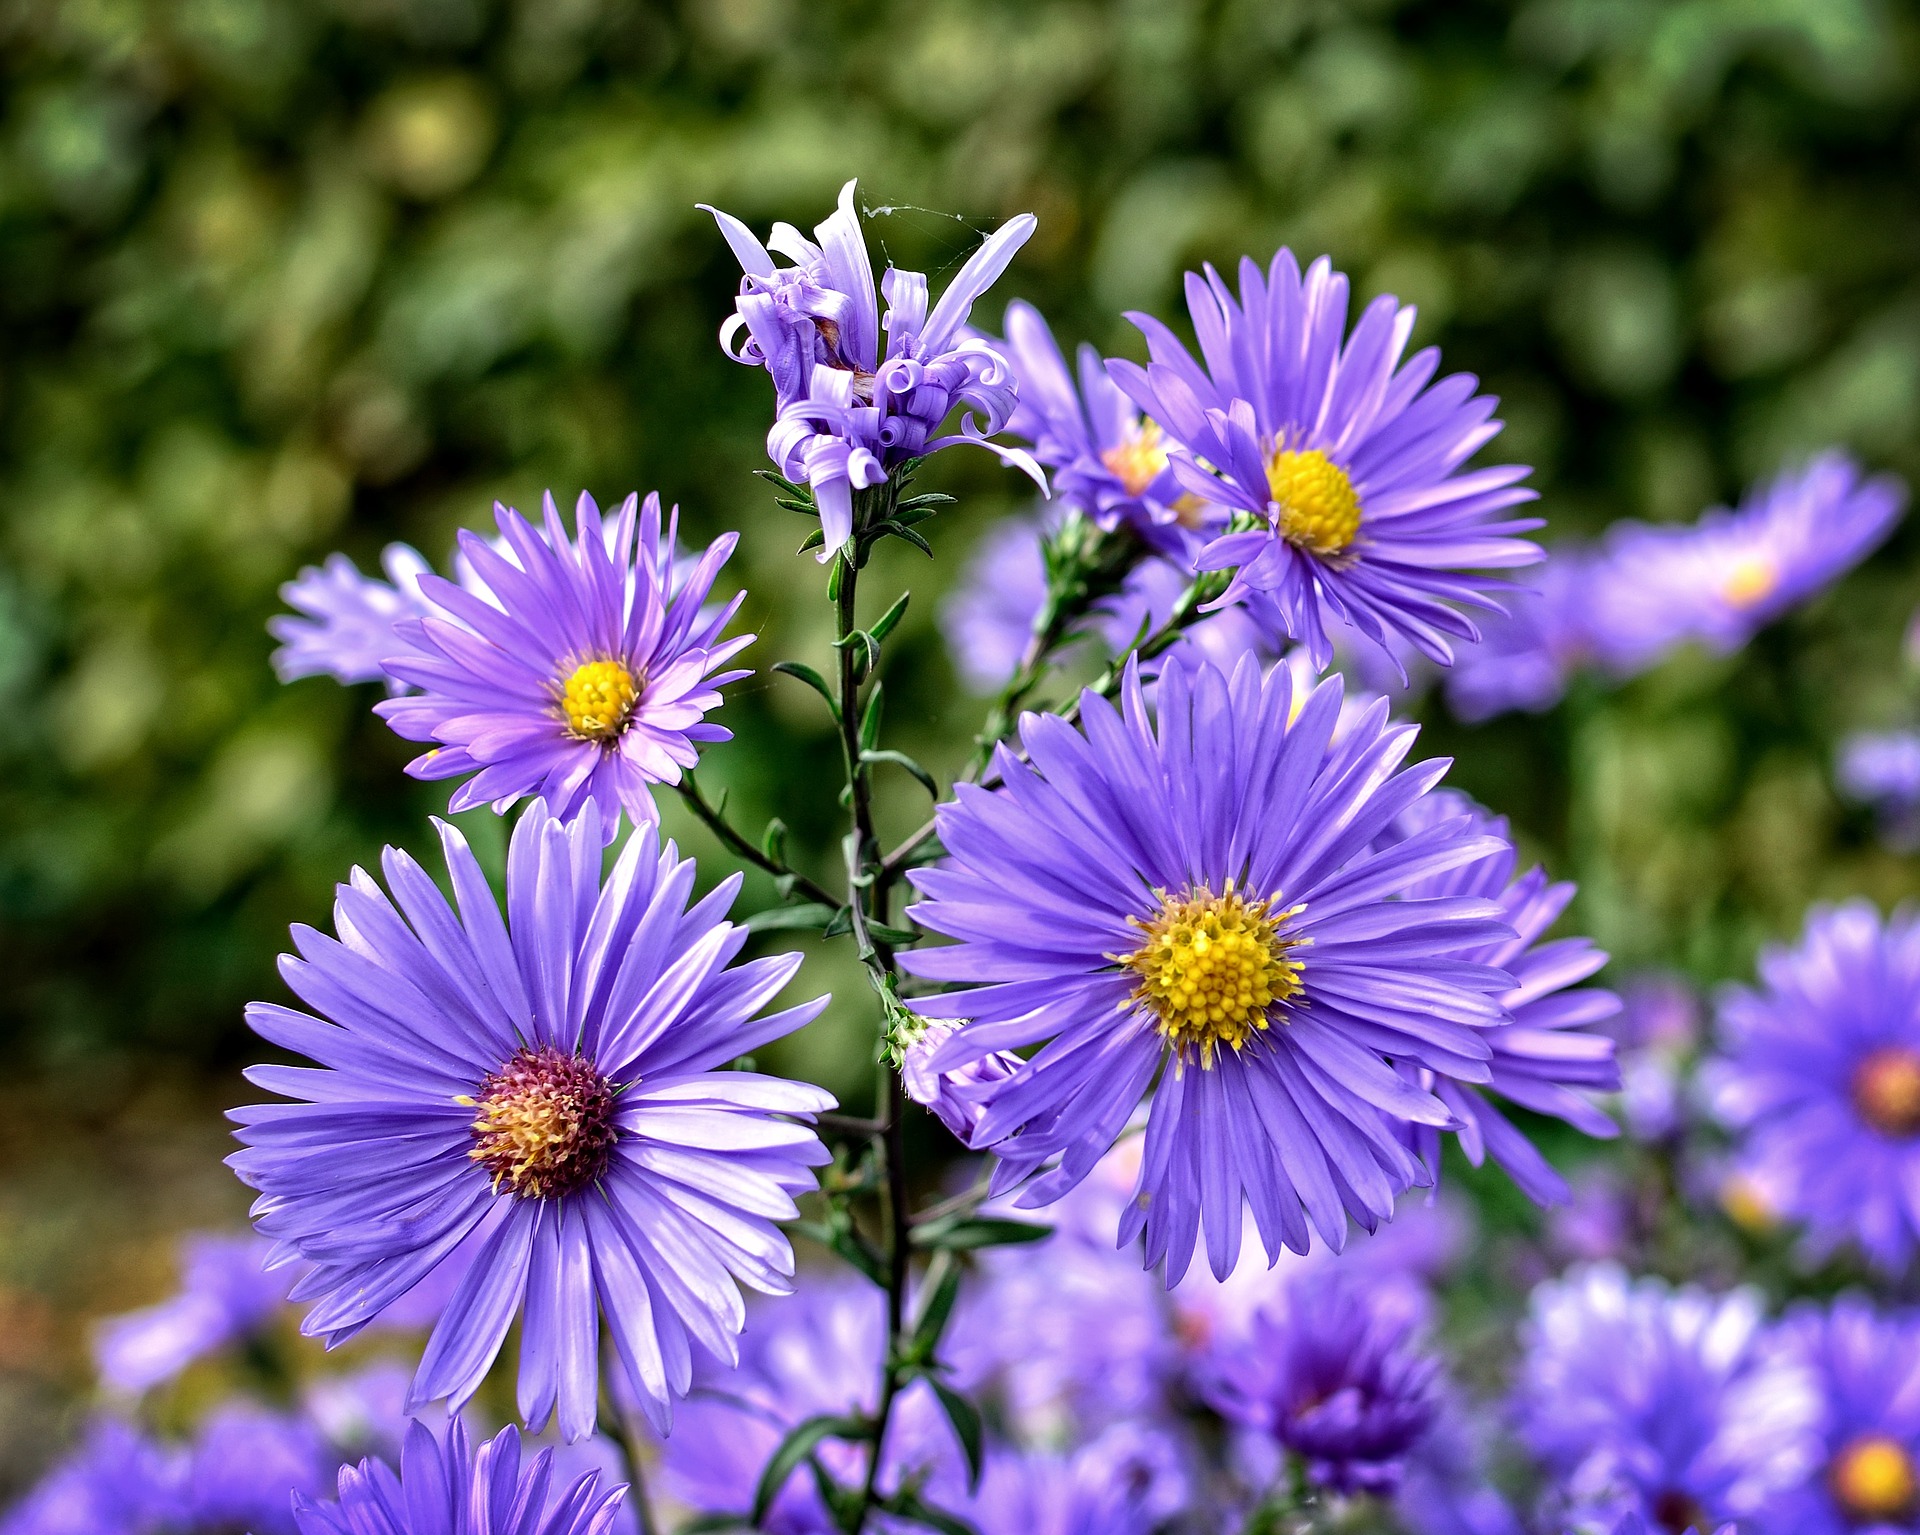 Aster: How to Plant, Grow, and Care for Aster Flowers | The Old ...